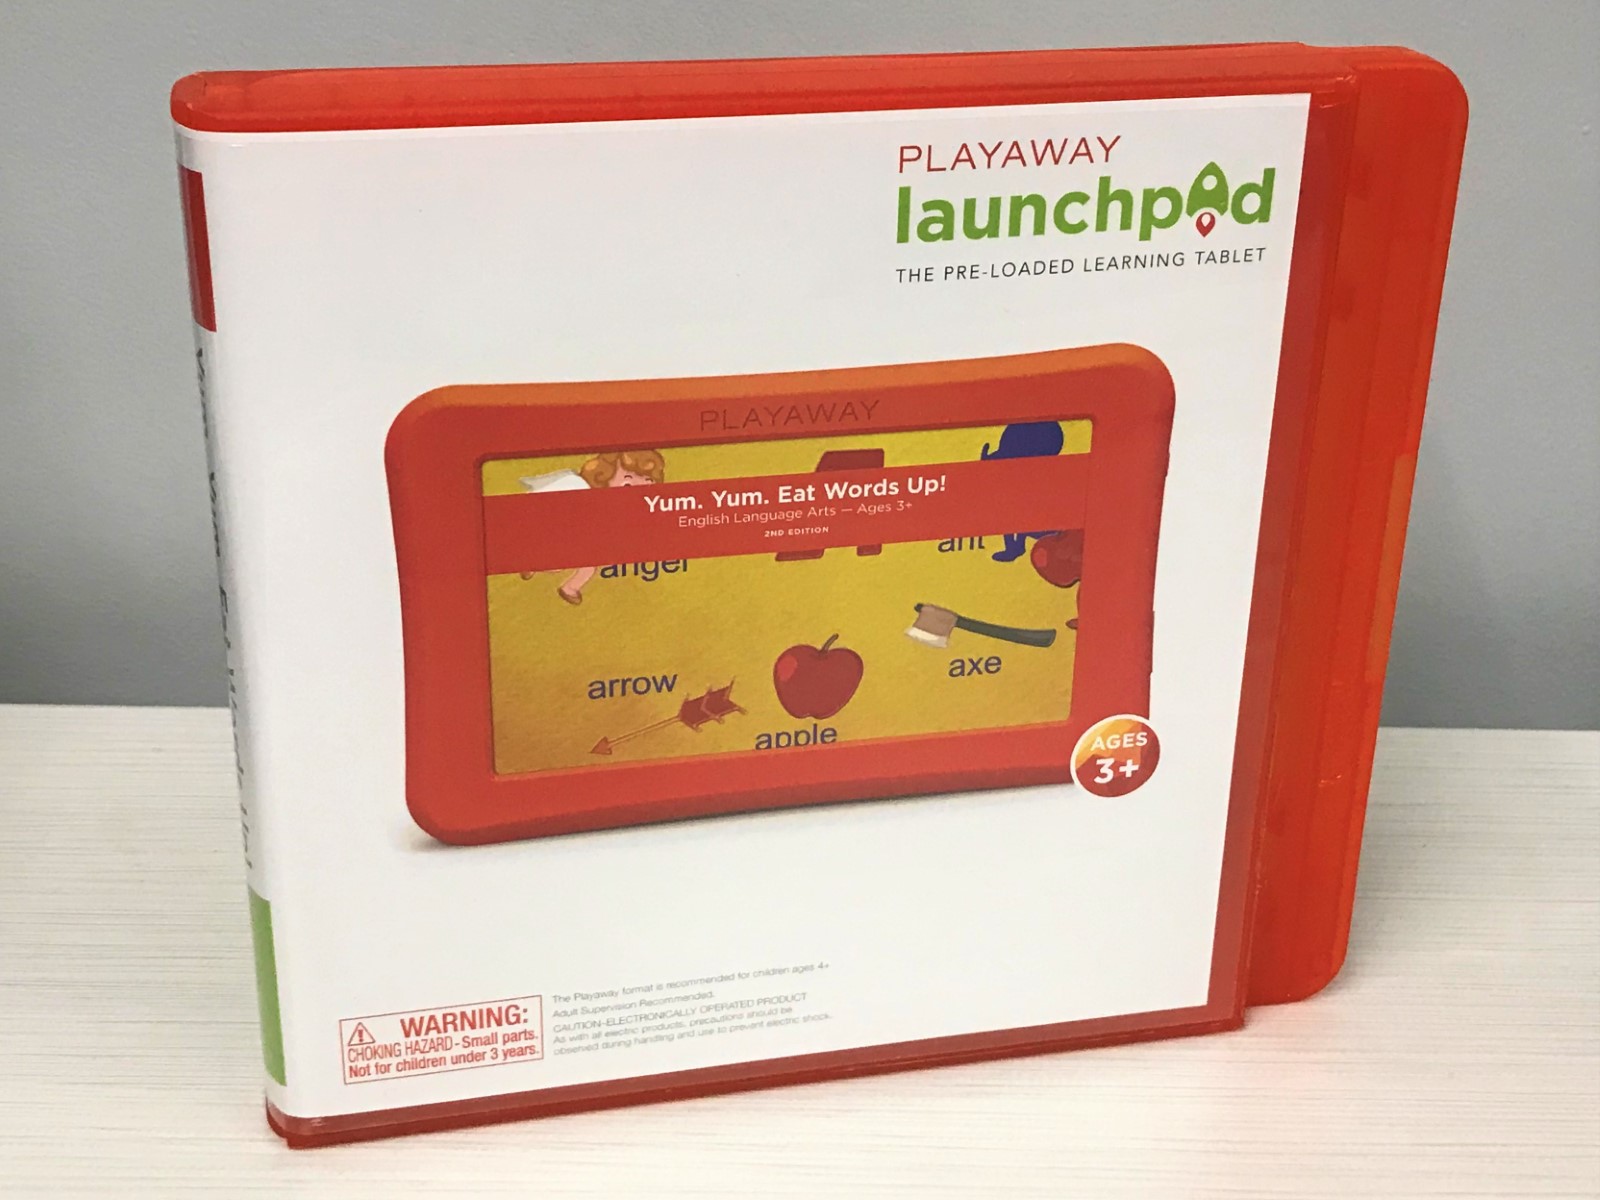 Case for Launchpad: Yum. Yum. Eat Words Up!